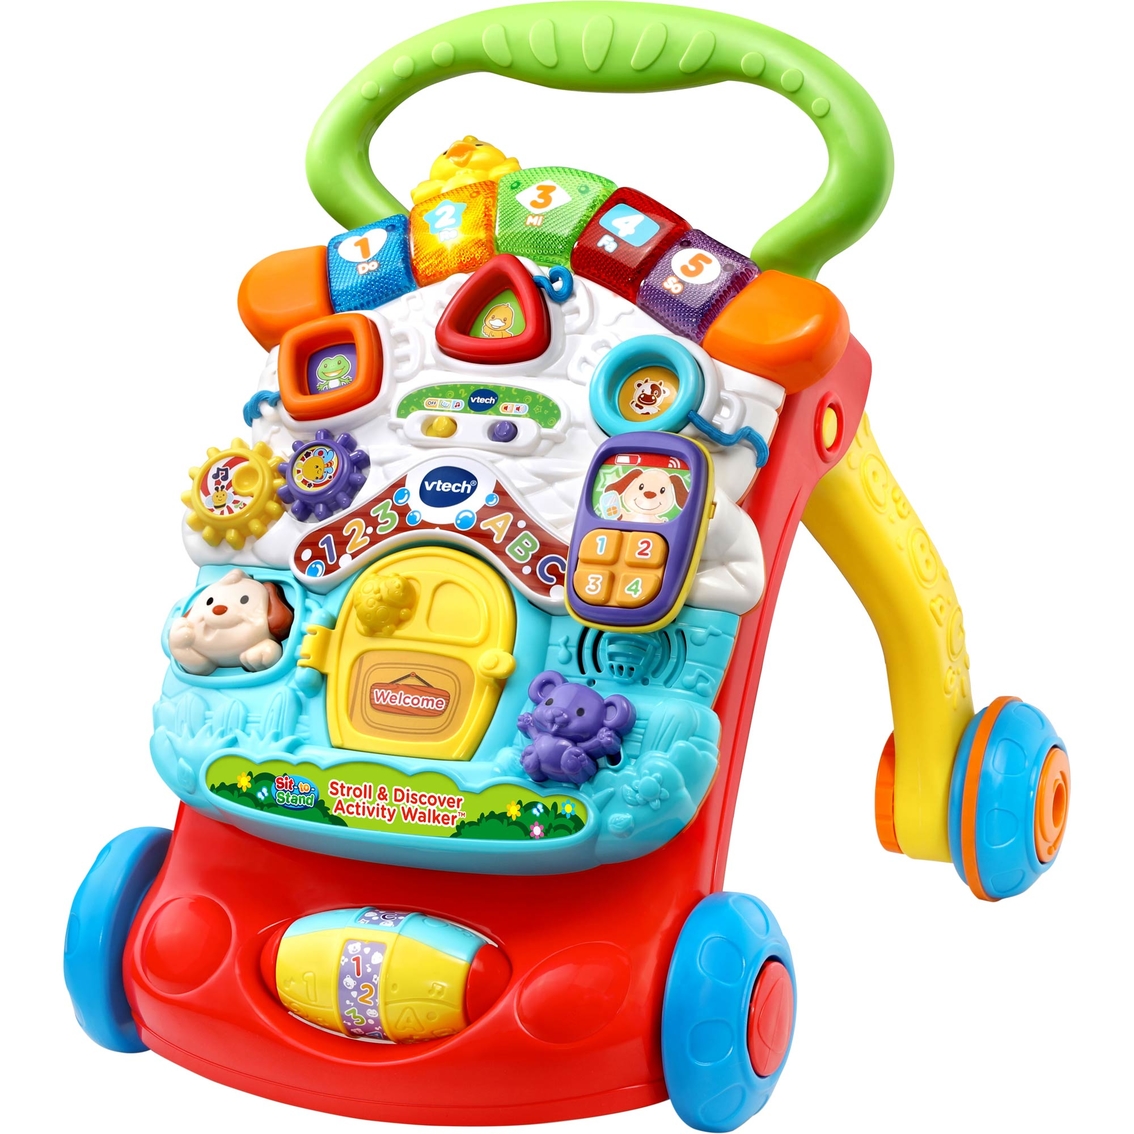 VTech Stroll & Discover Activity Walker Deluxe - Image 2 of 4